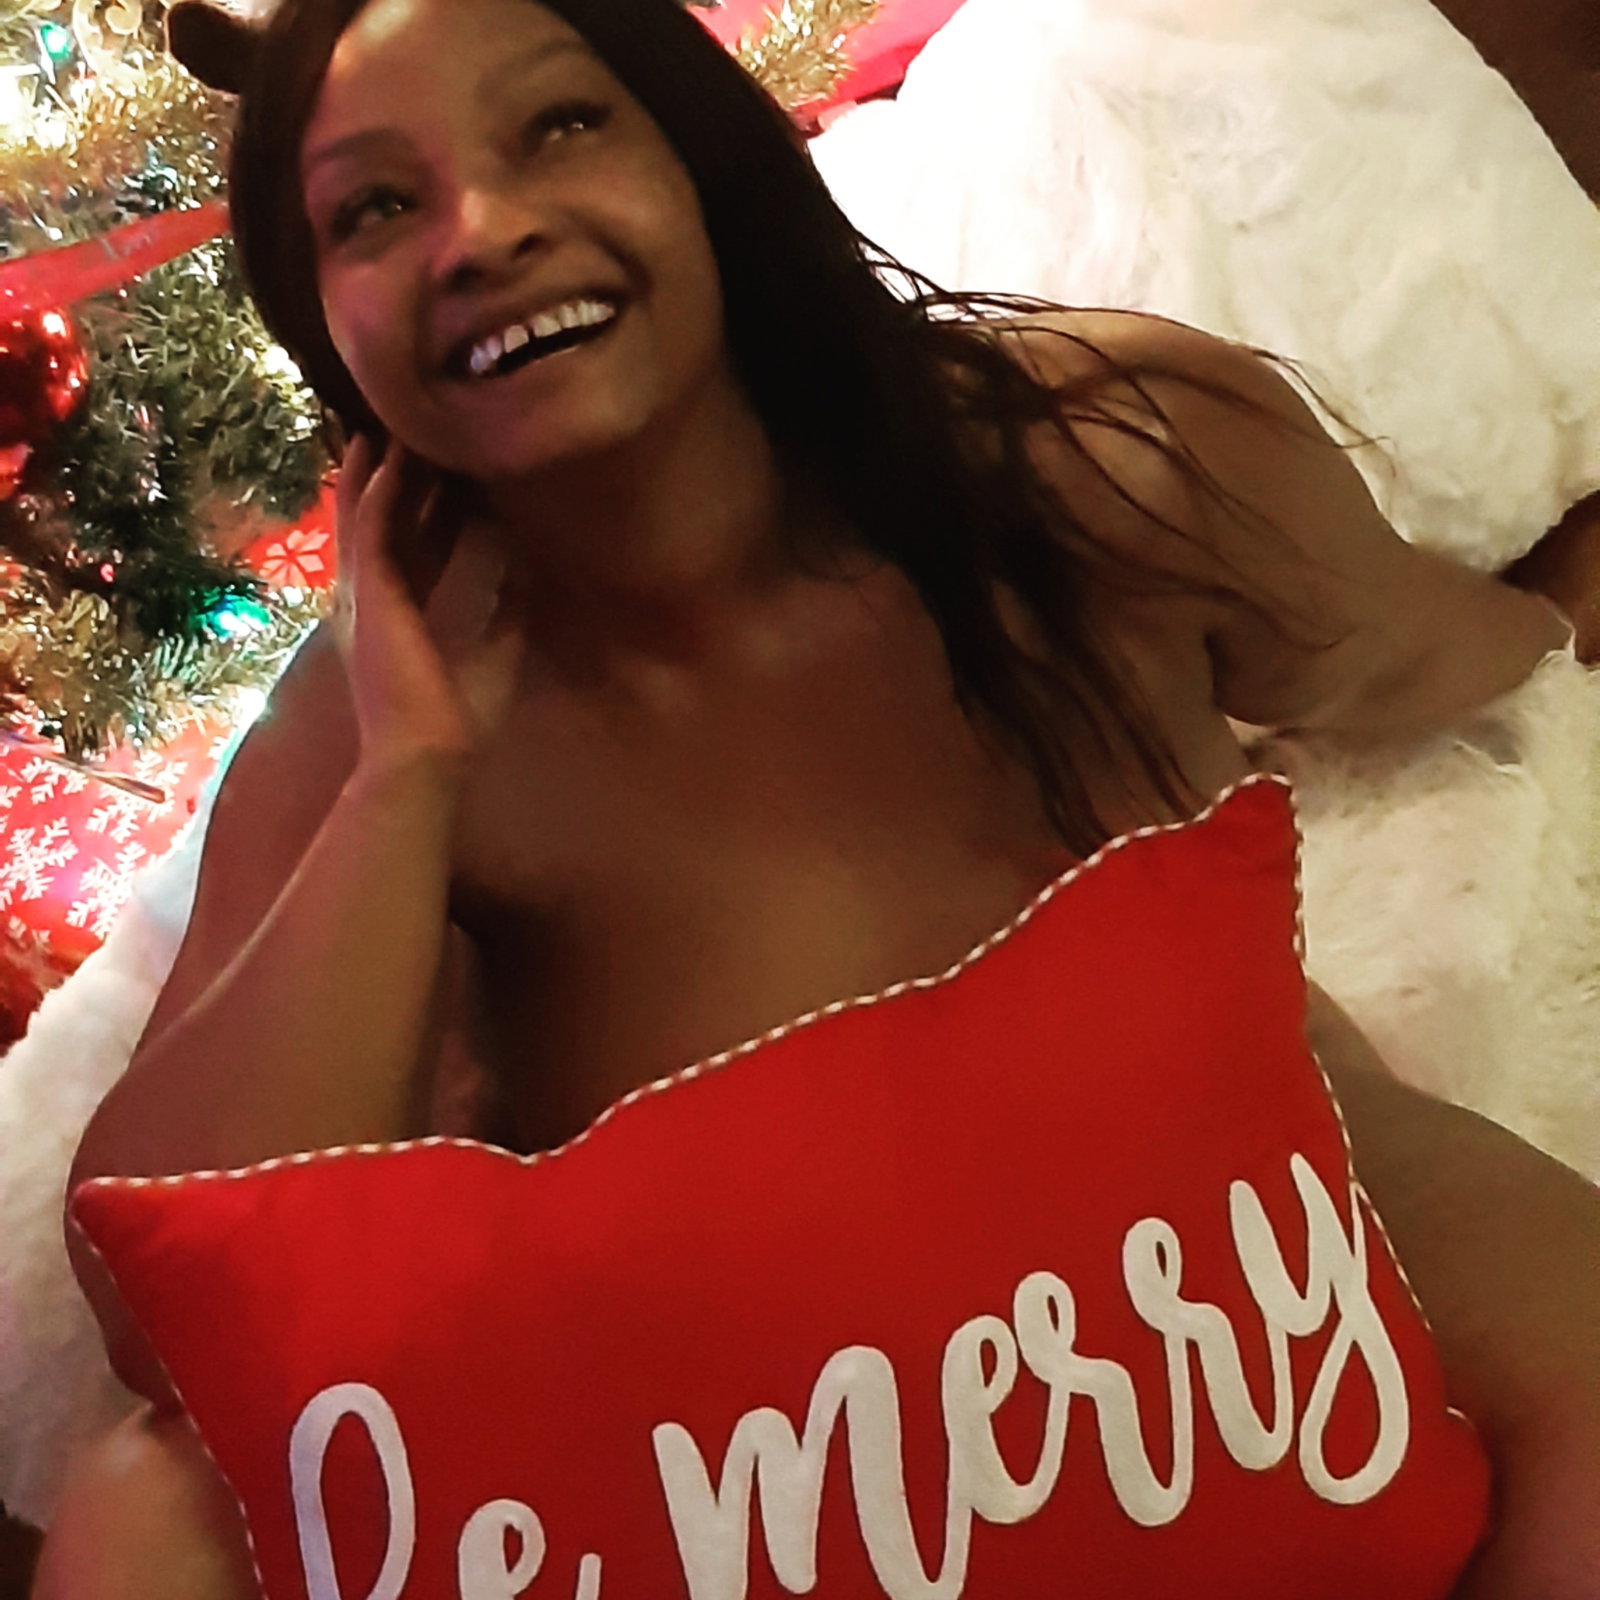 Photo by Eva Godiva with the username @EvaGodiva, who is a star user,  December 22, 2019 at 5:34 PM. The post is about the topic Ebony Amateur and the text says 'naughty or nice 

bigbootygoddess.xxx'